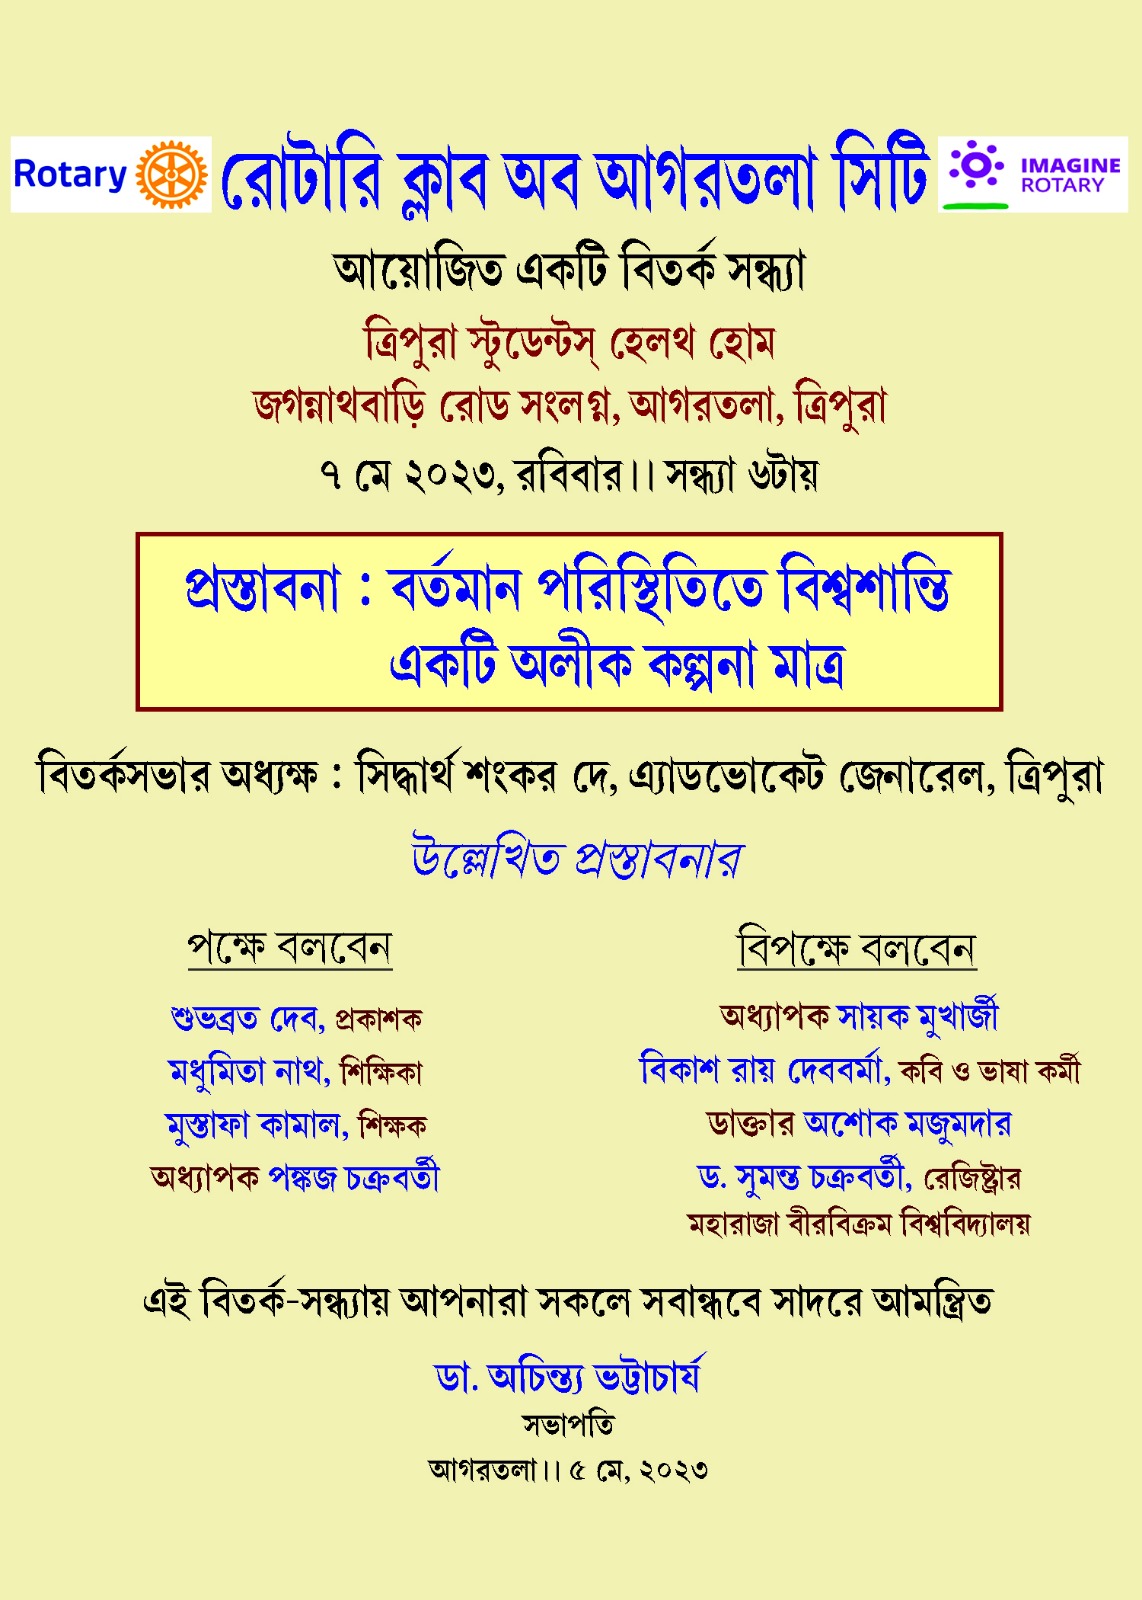 RCAC Debate on the topic ‘In the present scenario World Peace is nothing but an illusion’, 7th May 2023 at Students’ Health Home Auditorium, Agartala.